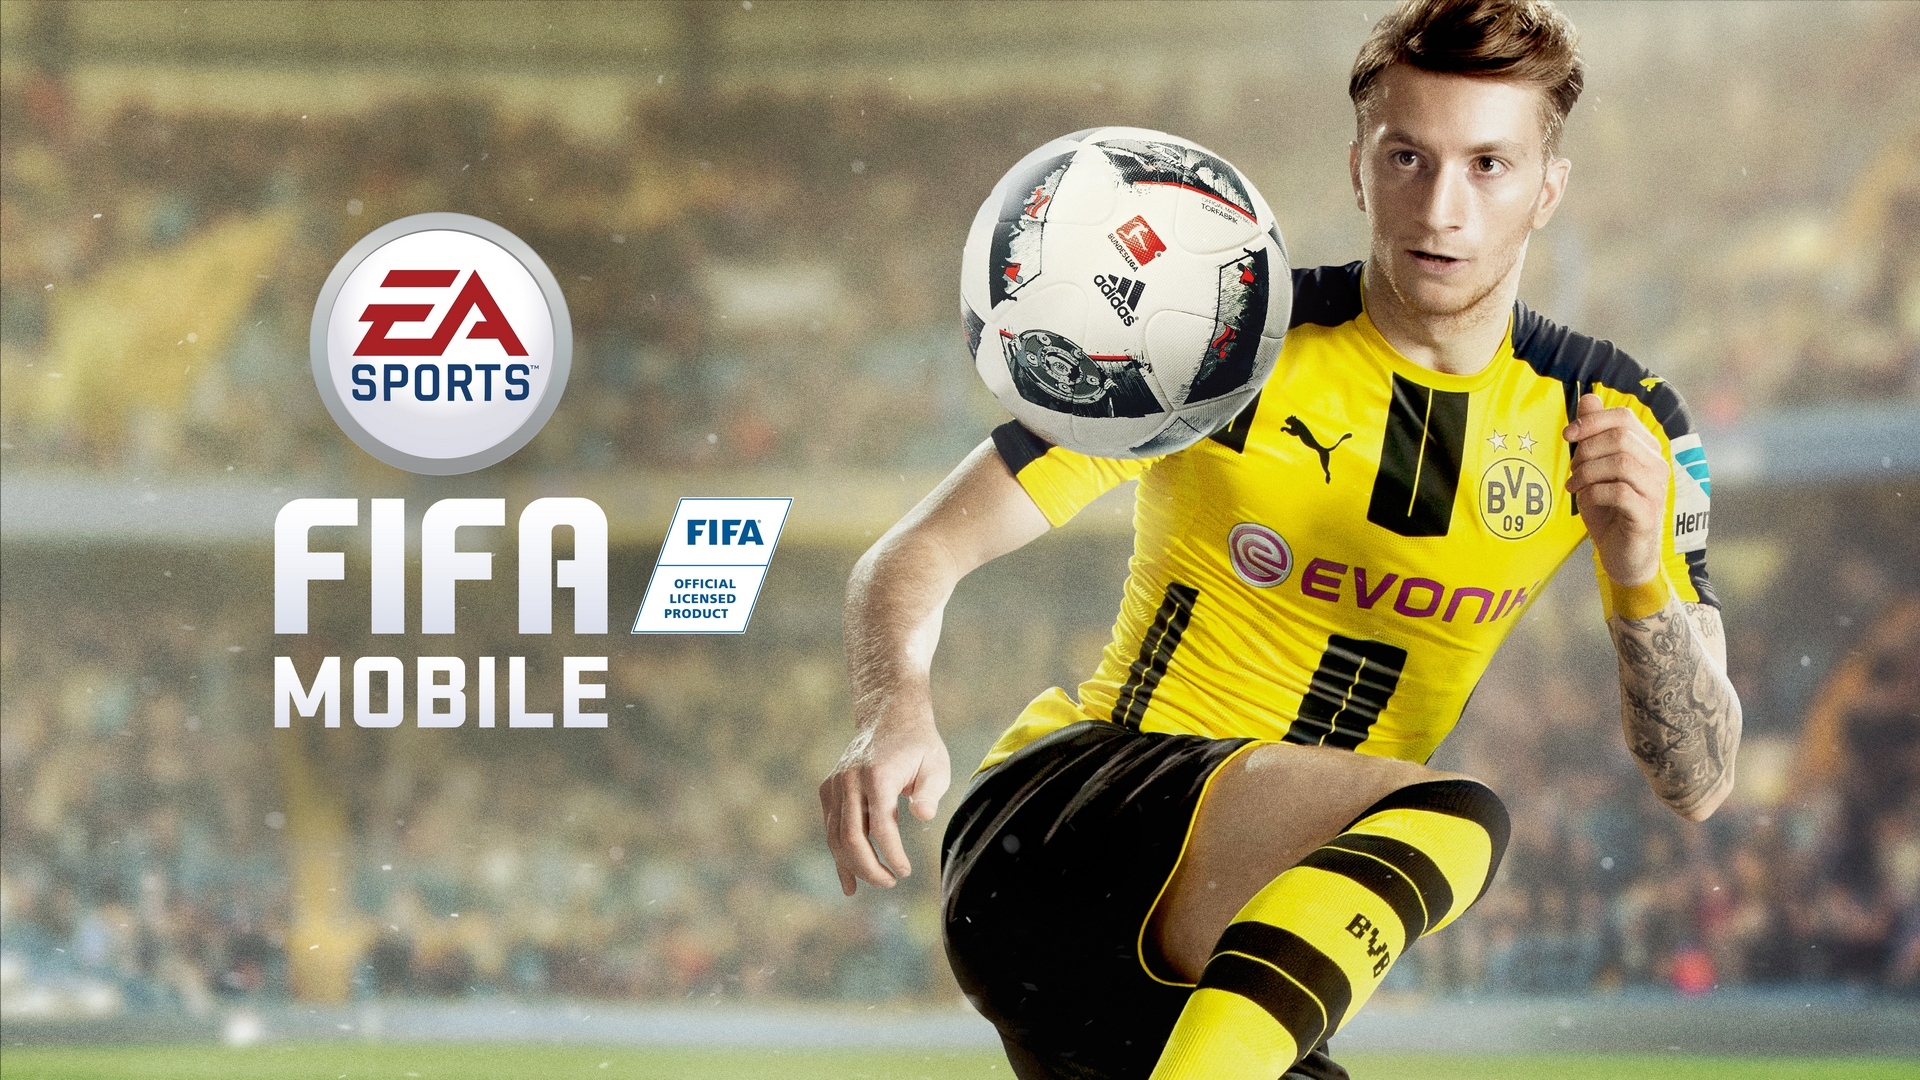 A Reimagined Football Game For Players On-The-Go Arrives With EA.